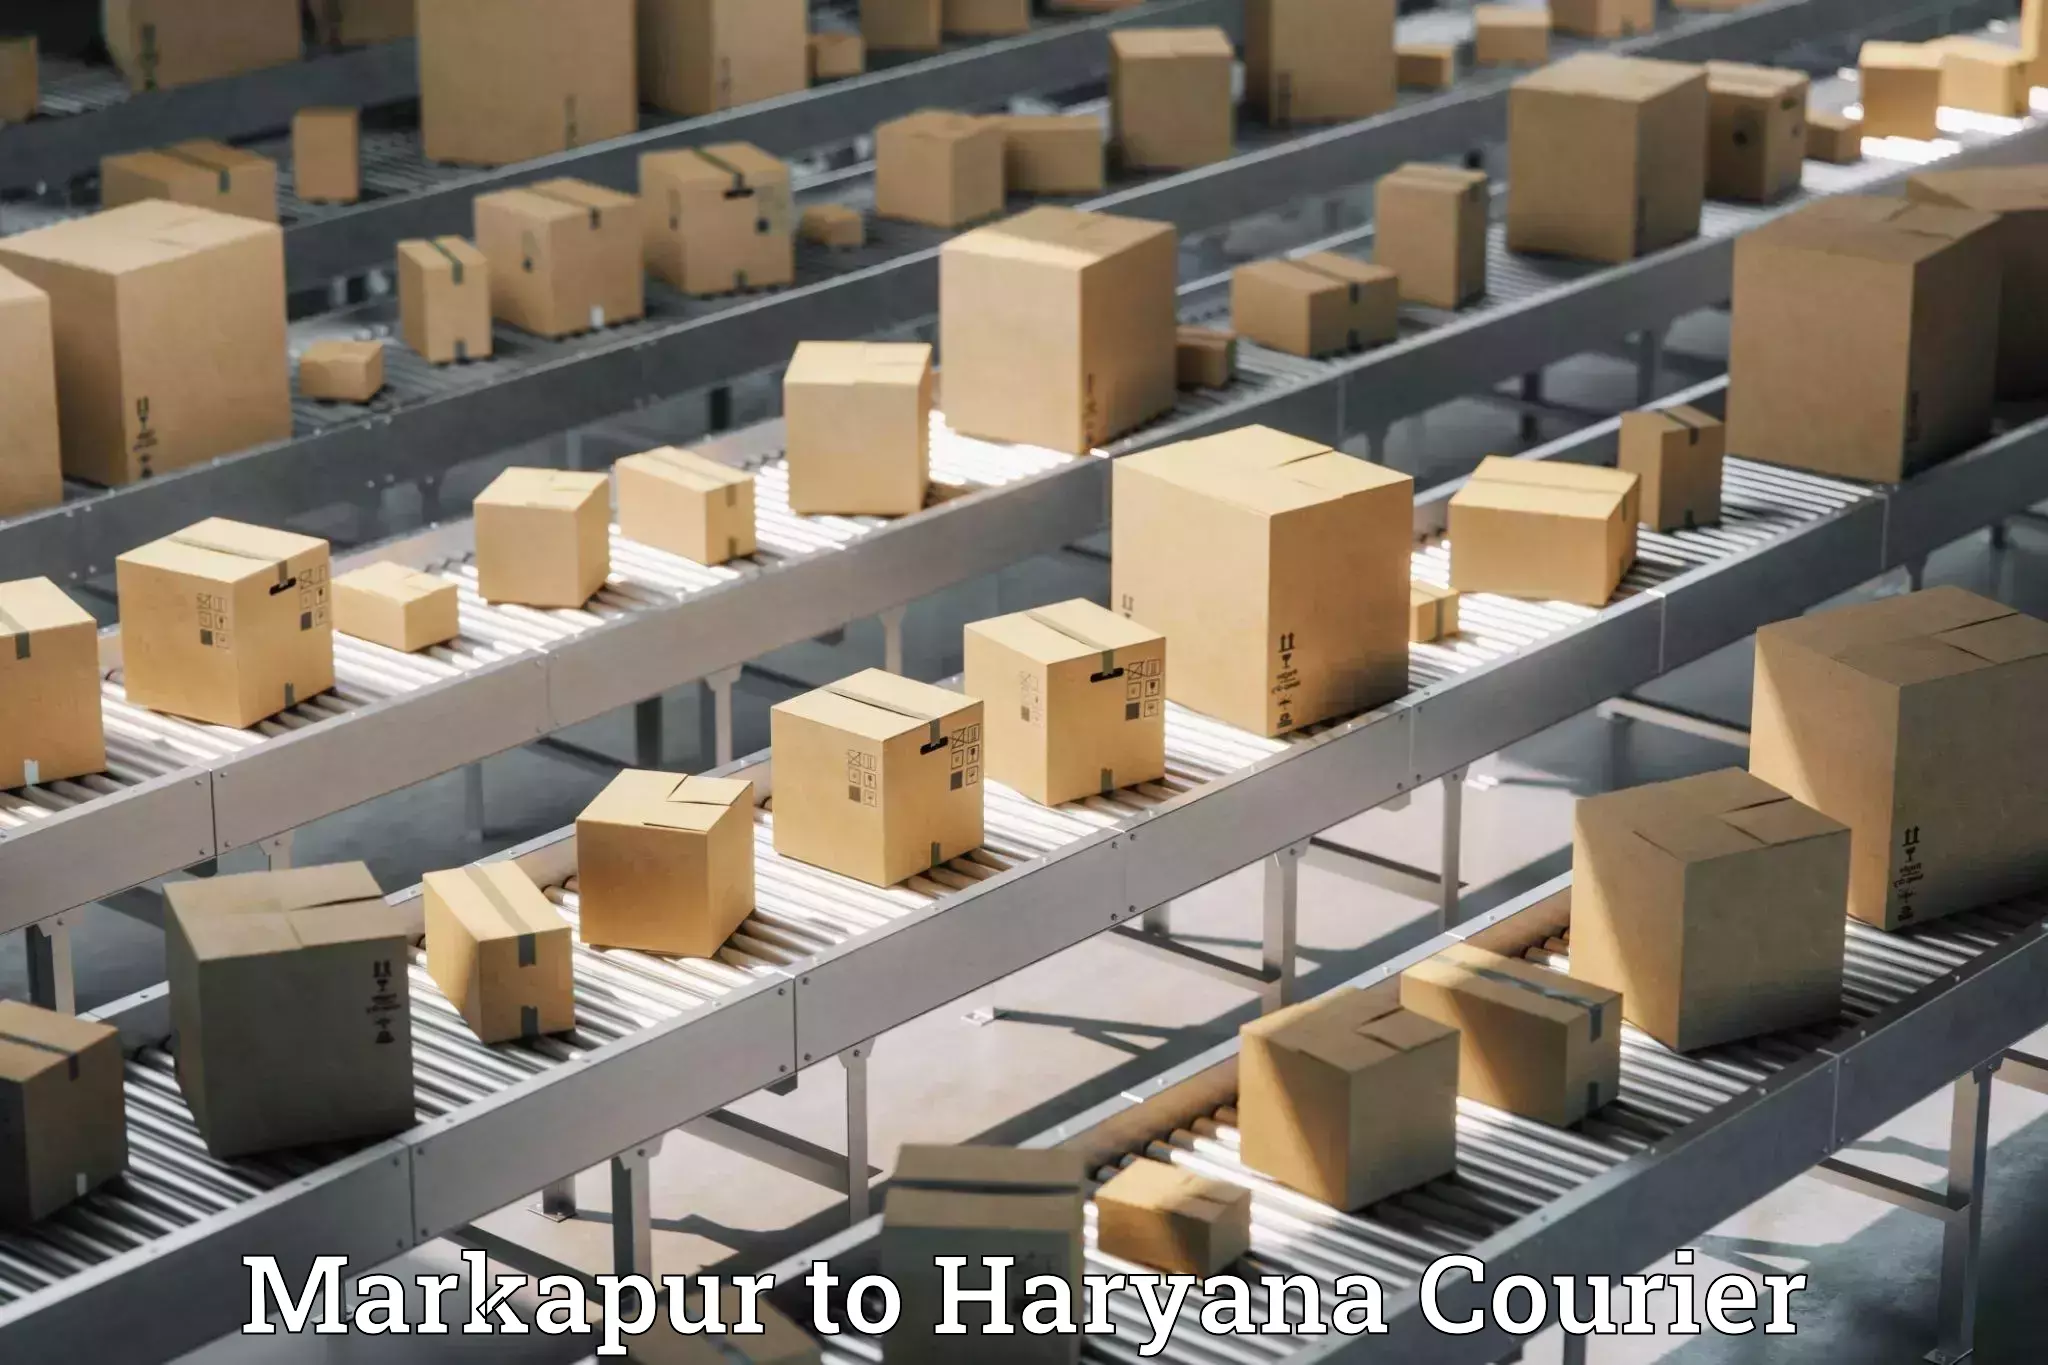 Flexible delivery scheduling Markapur to NCR Haryana